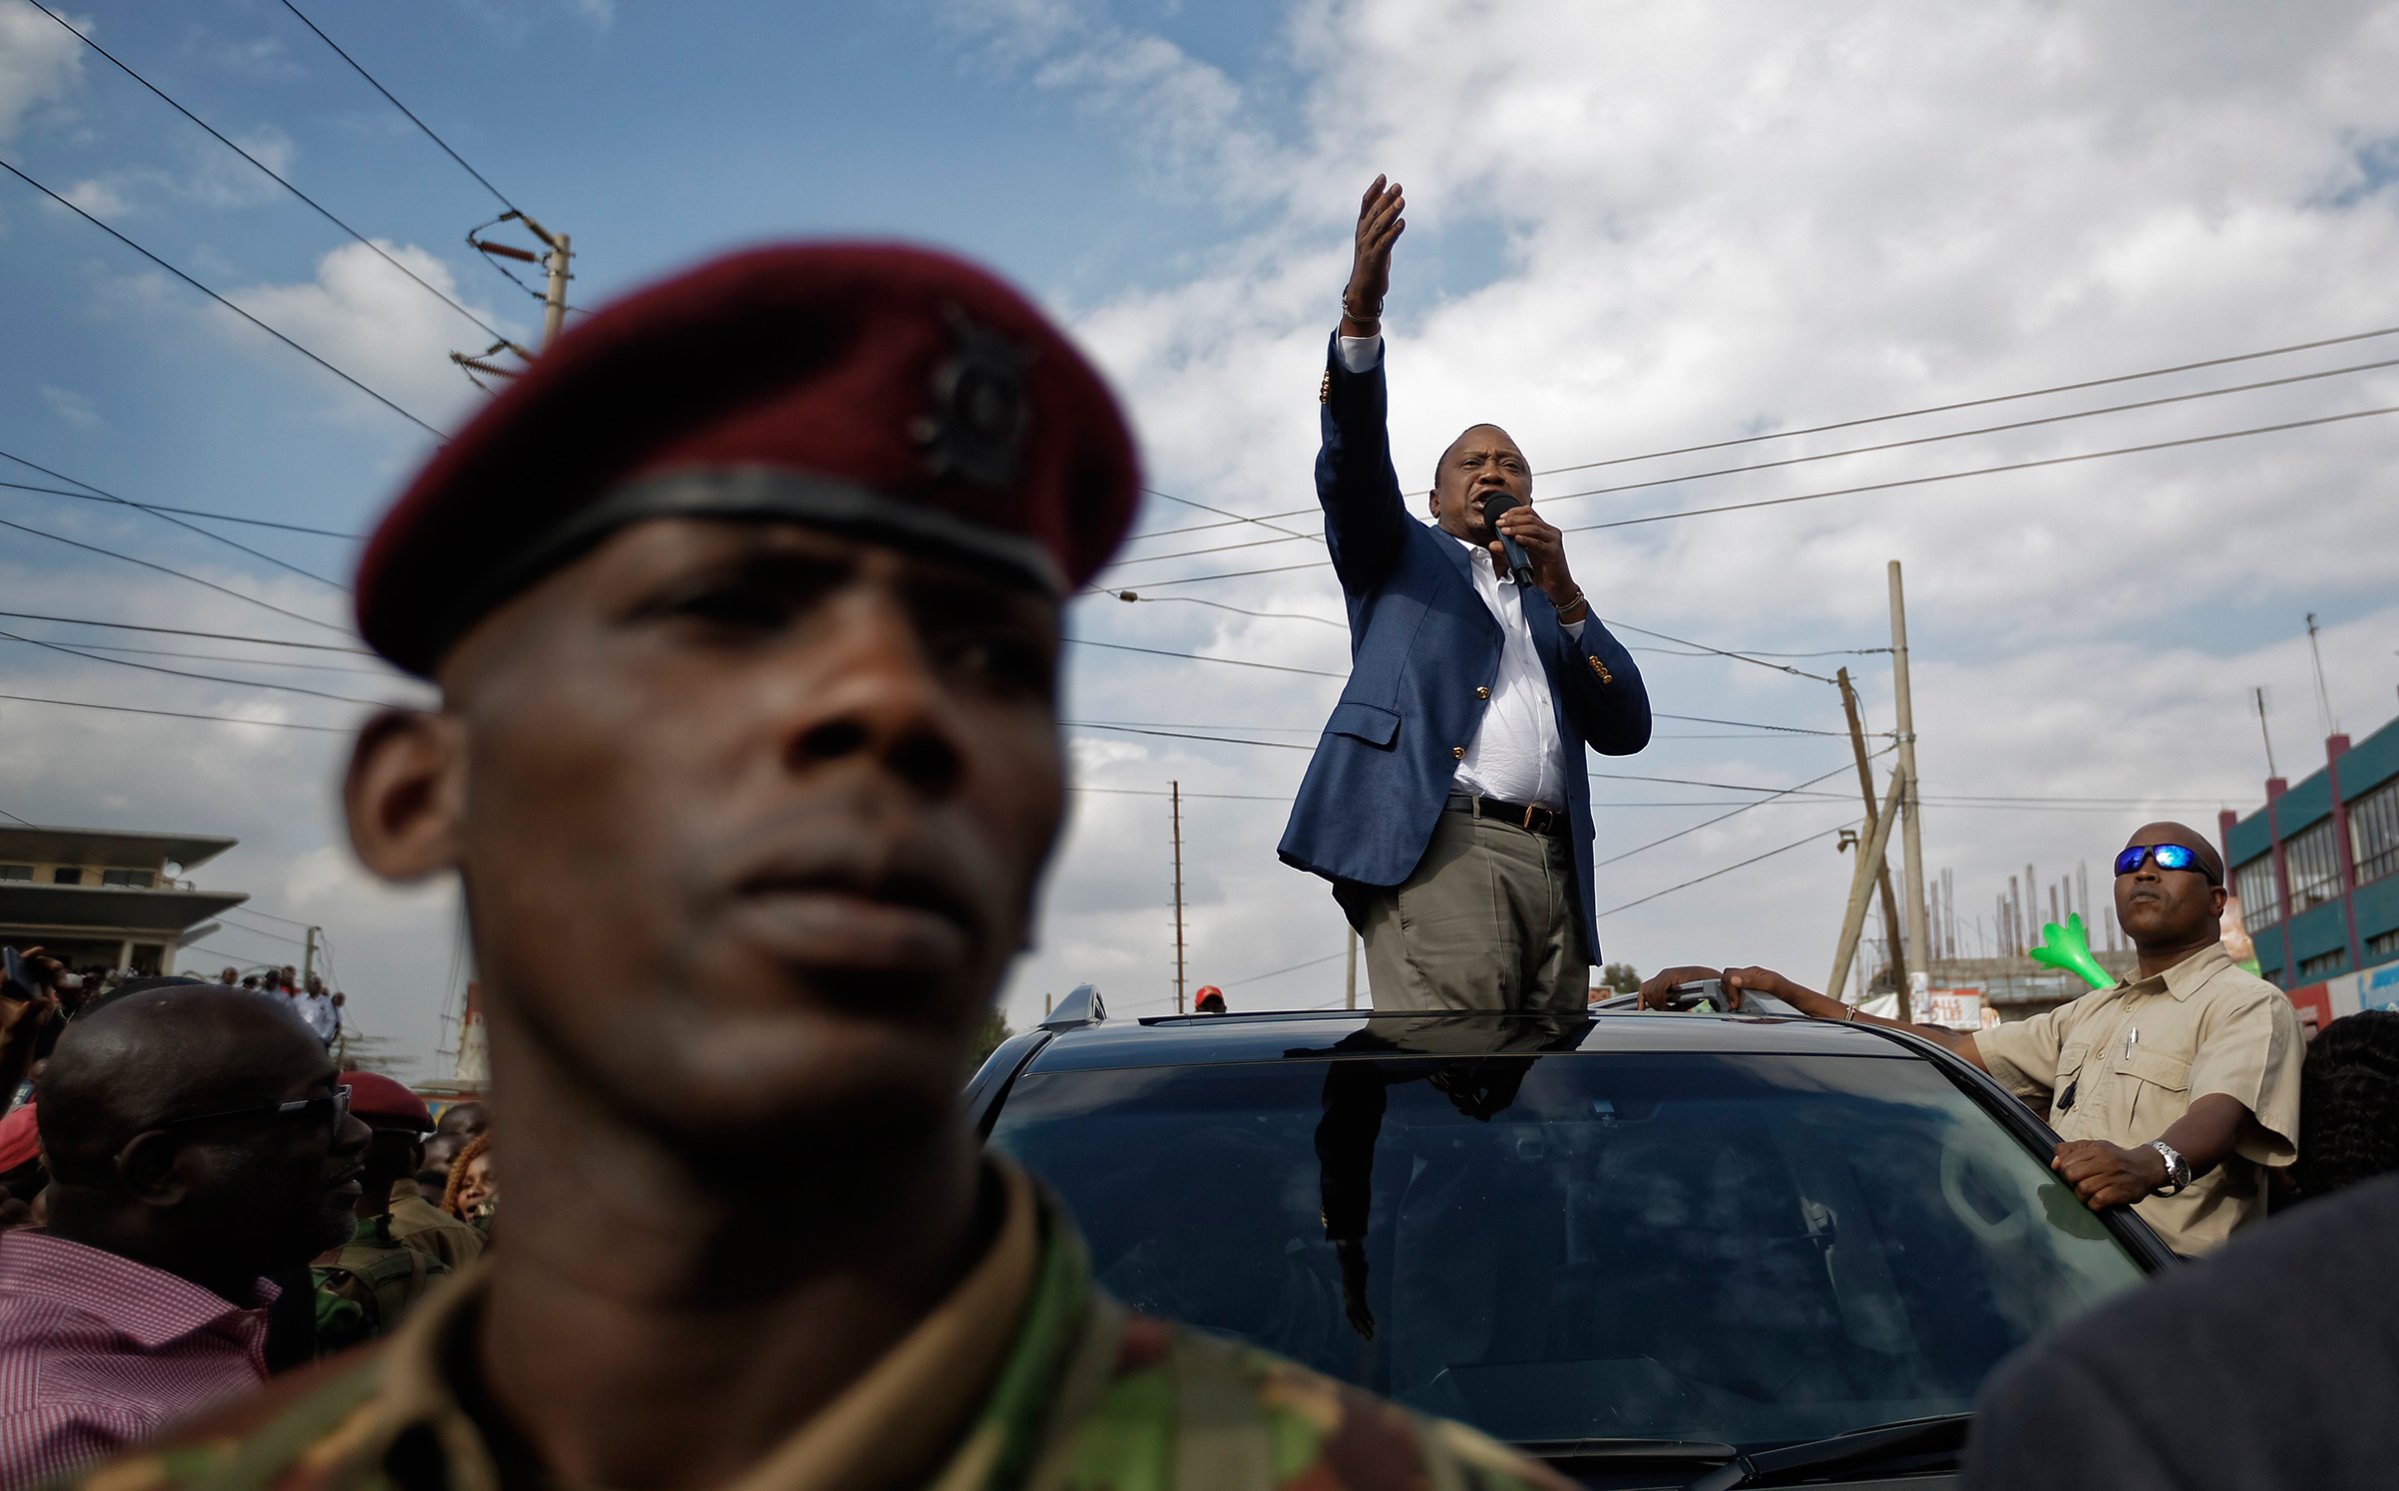 Kenya's President Uhuru Kenyatta, standing through the sunroof of the presidential vehicle, addresses his supporters as a presidential guard provides security, left, on a street in Ongata Rongai, on the outskirts of Nairobi, Kenya, Sept. 5, 2017. Kenya faces an Oct. 17 vote after the Supreme Court nullified Kenyatta's re-election but opposition leader Raila Odinga said Tuesday he does not accept the date, demanding reforms to the electoral commission and other "legal and constitutional guarantees."